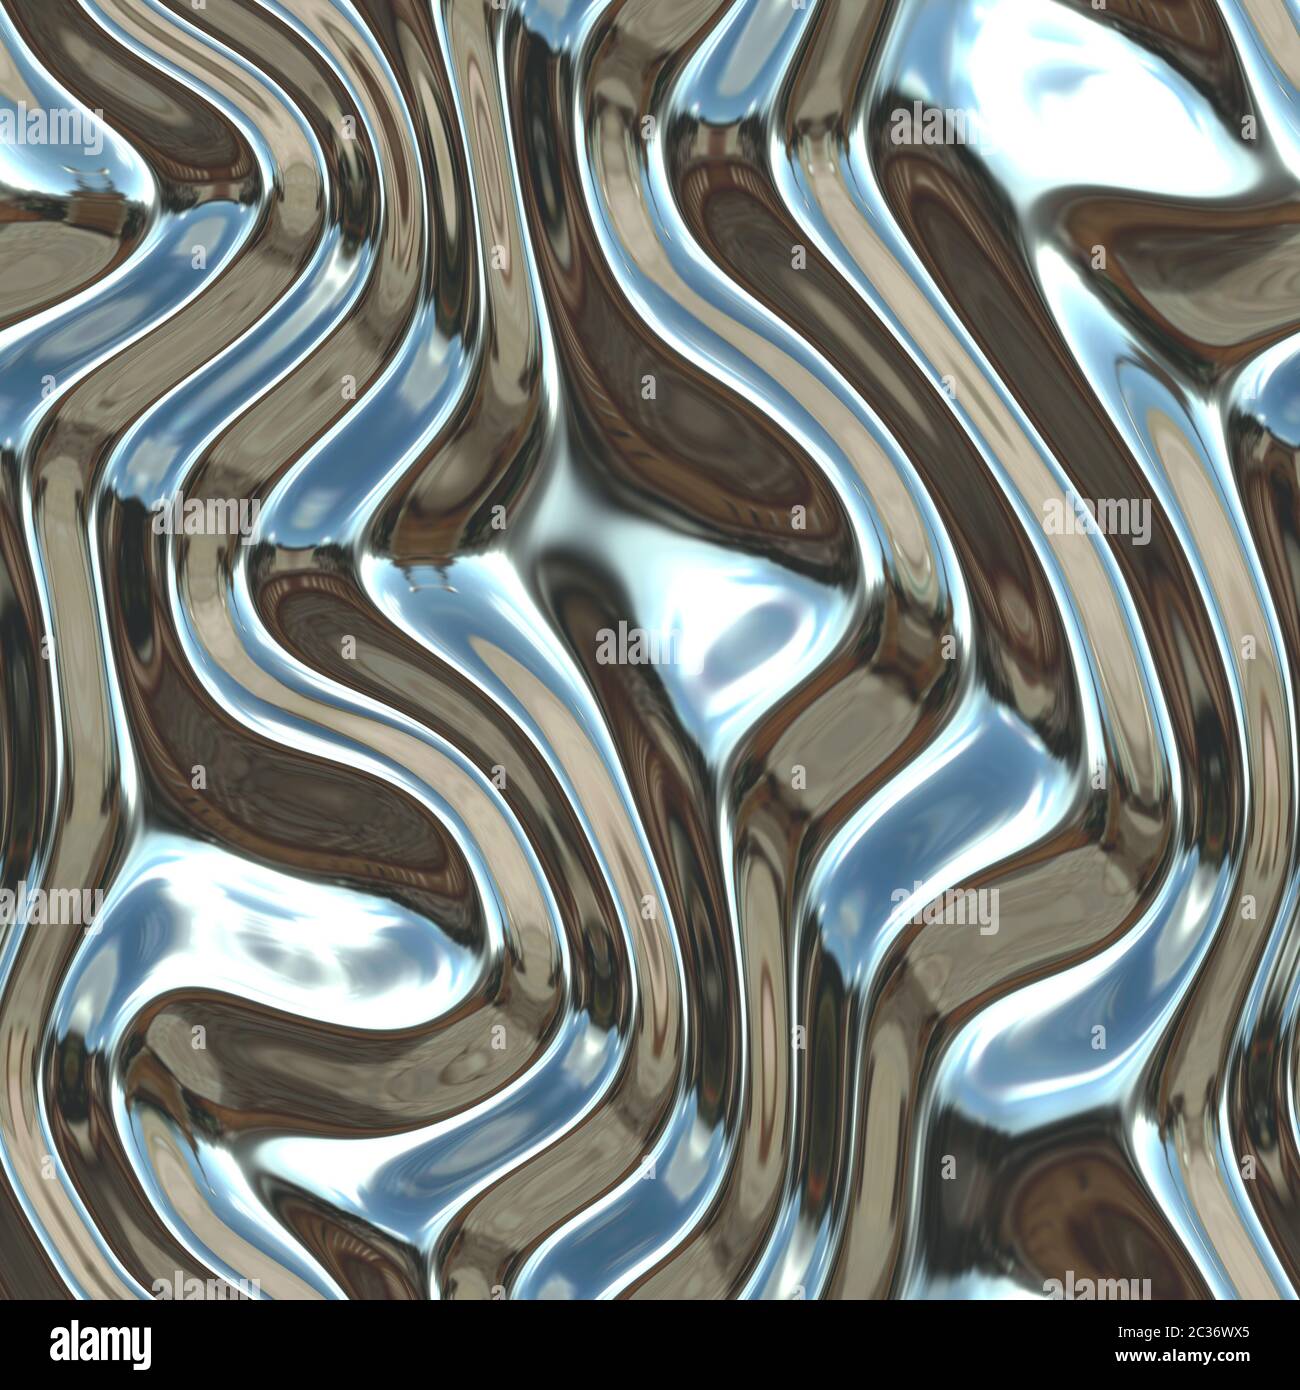 Textured Shiny Chrome Metal Surface Seamless Repeating Pattern Tile